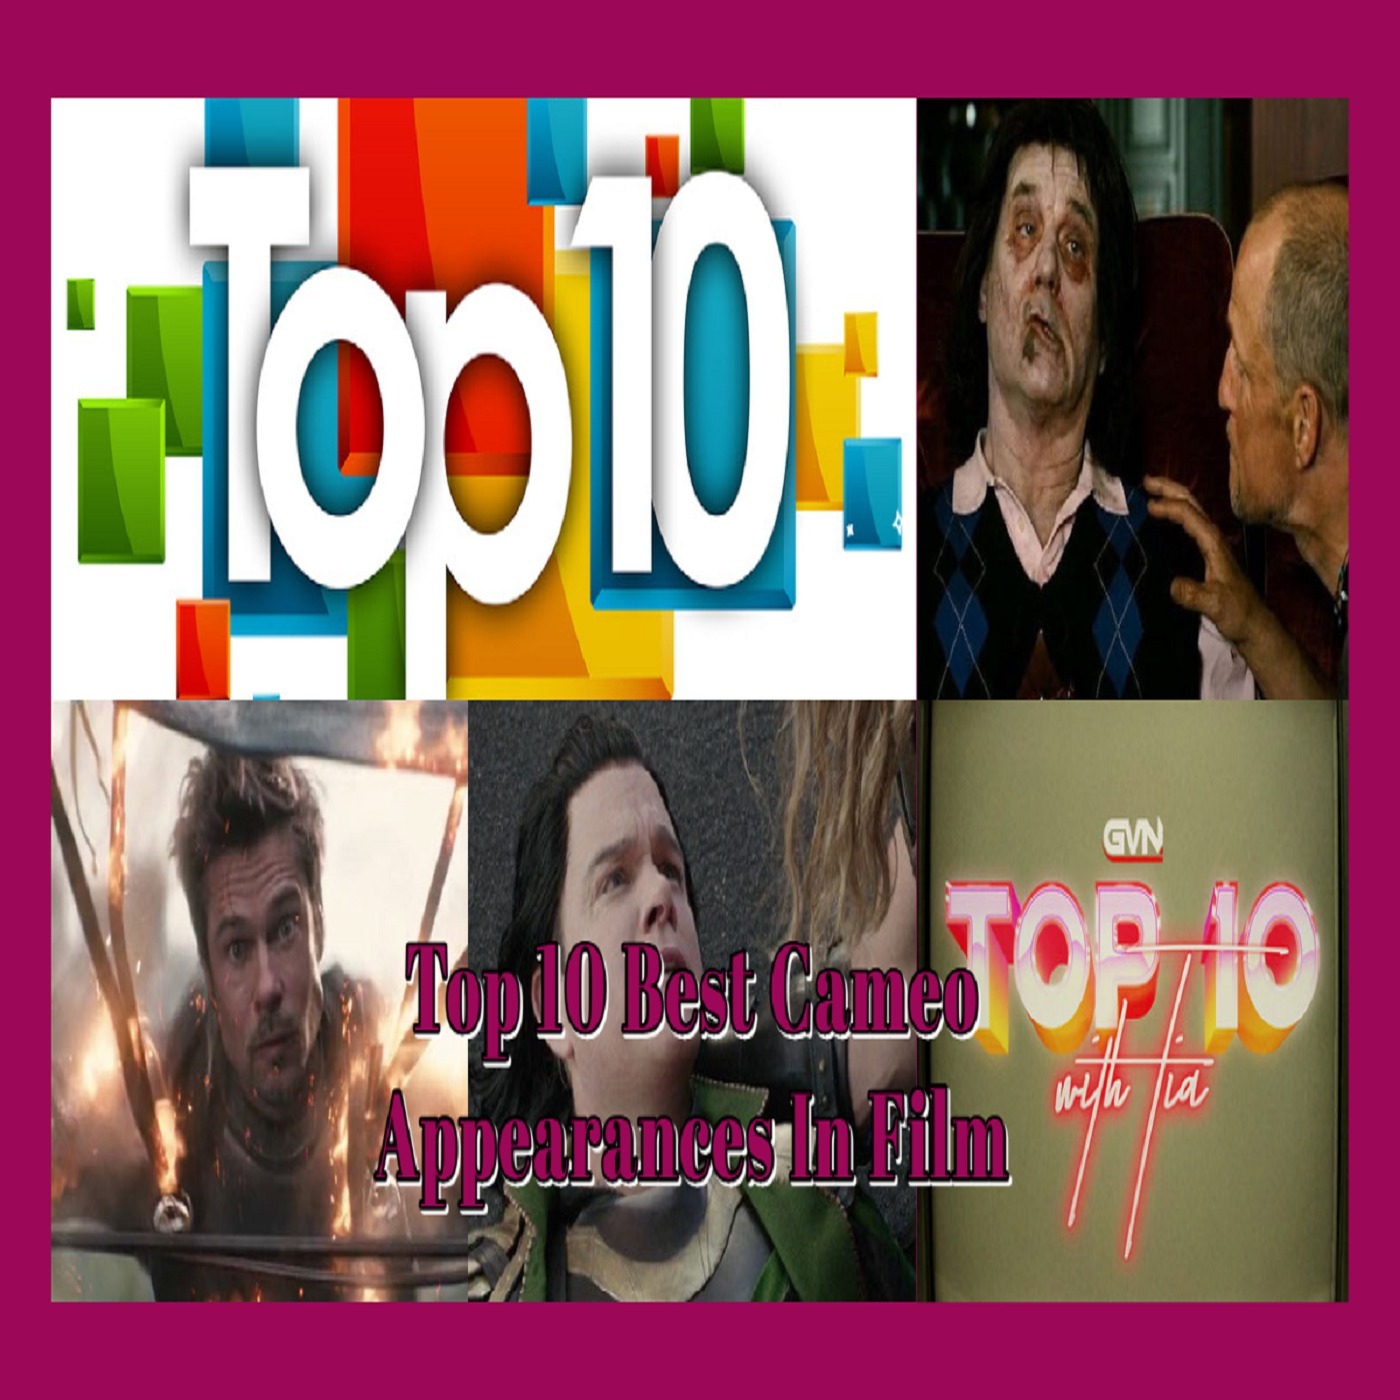 Top 10 Best Cameo Appearances In Film